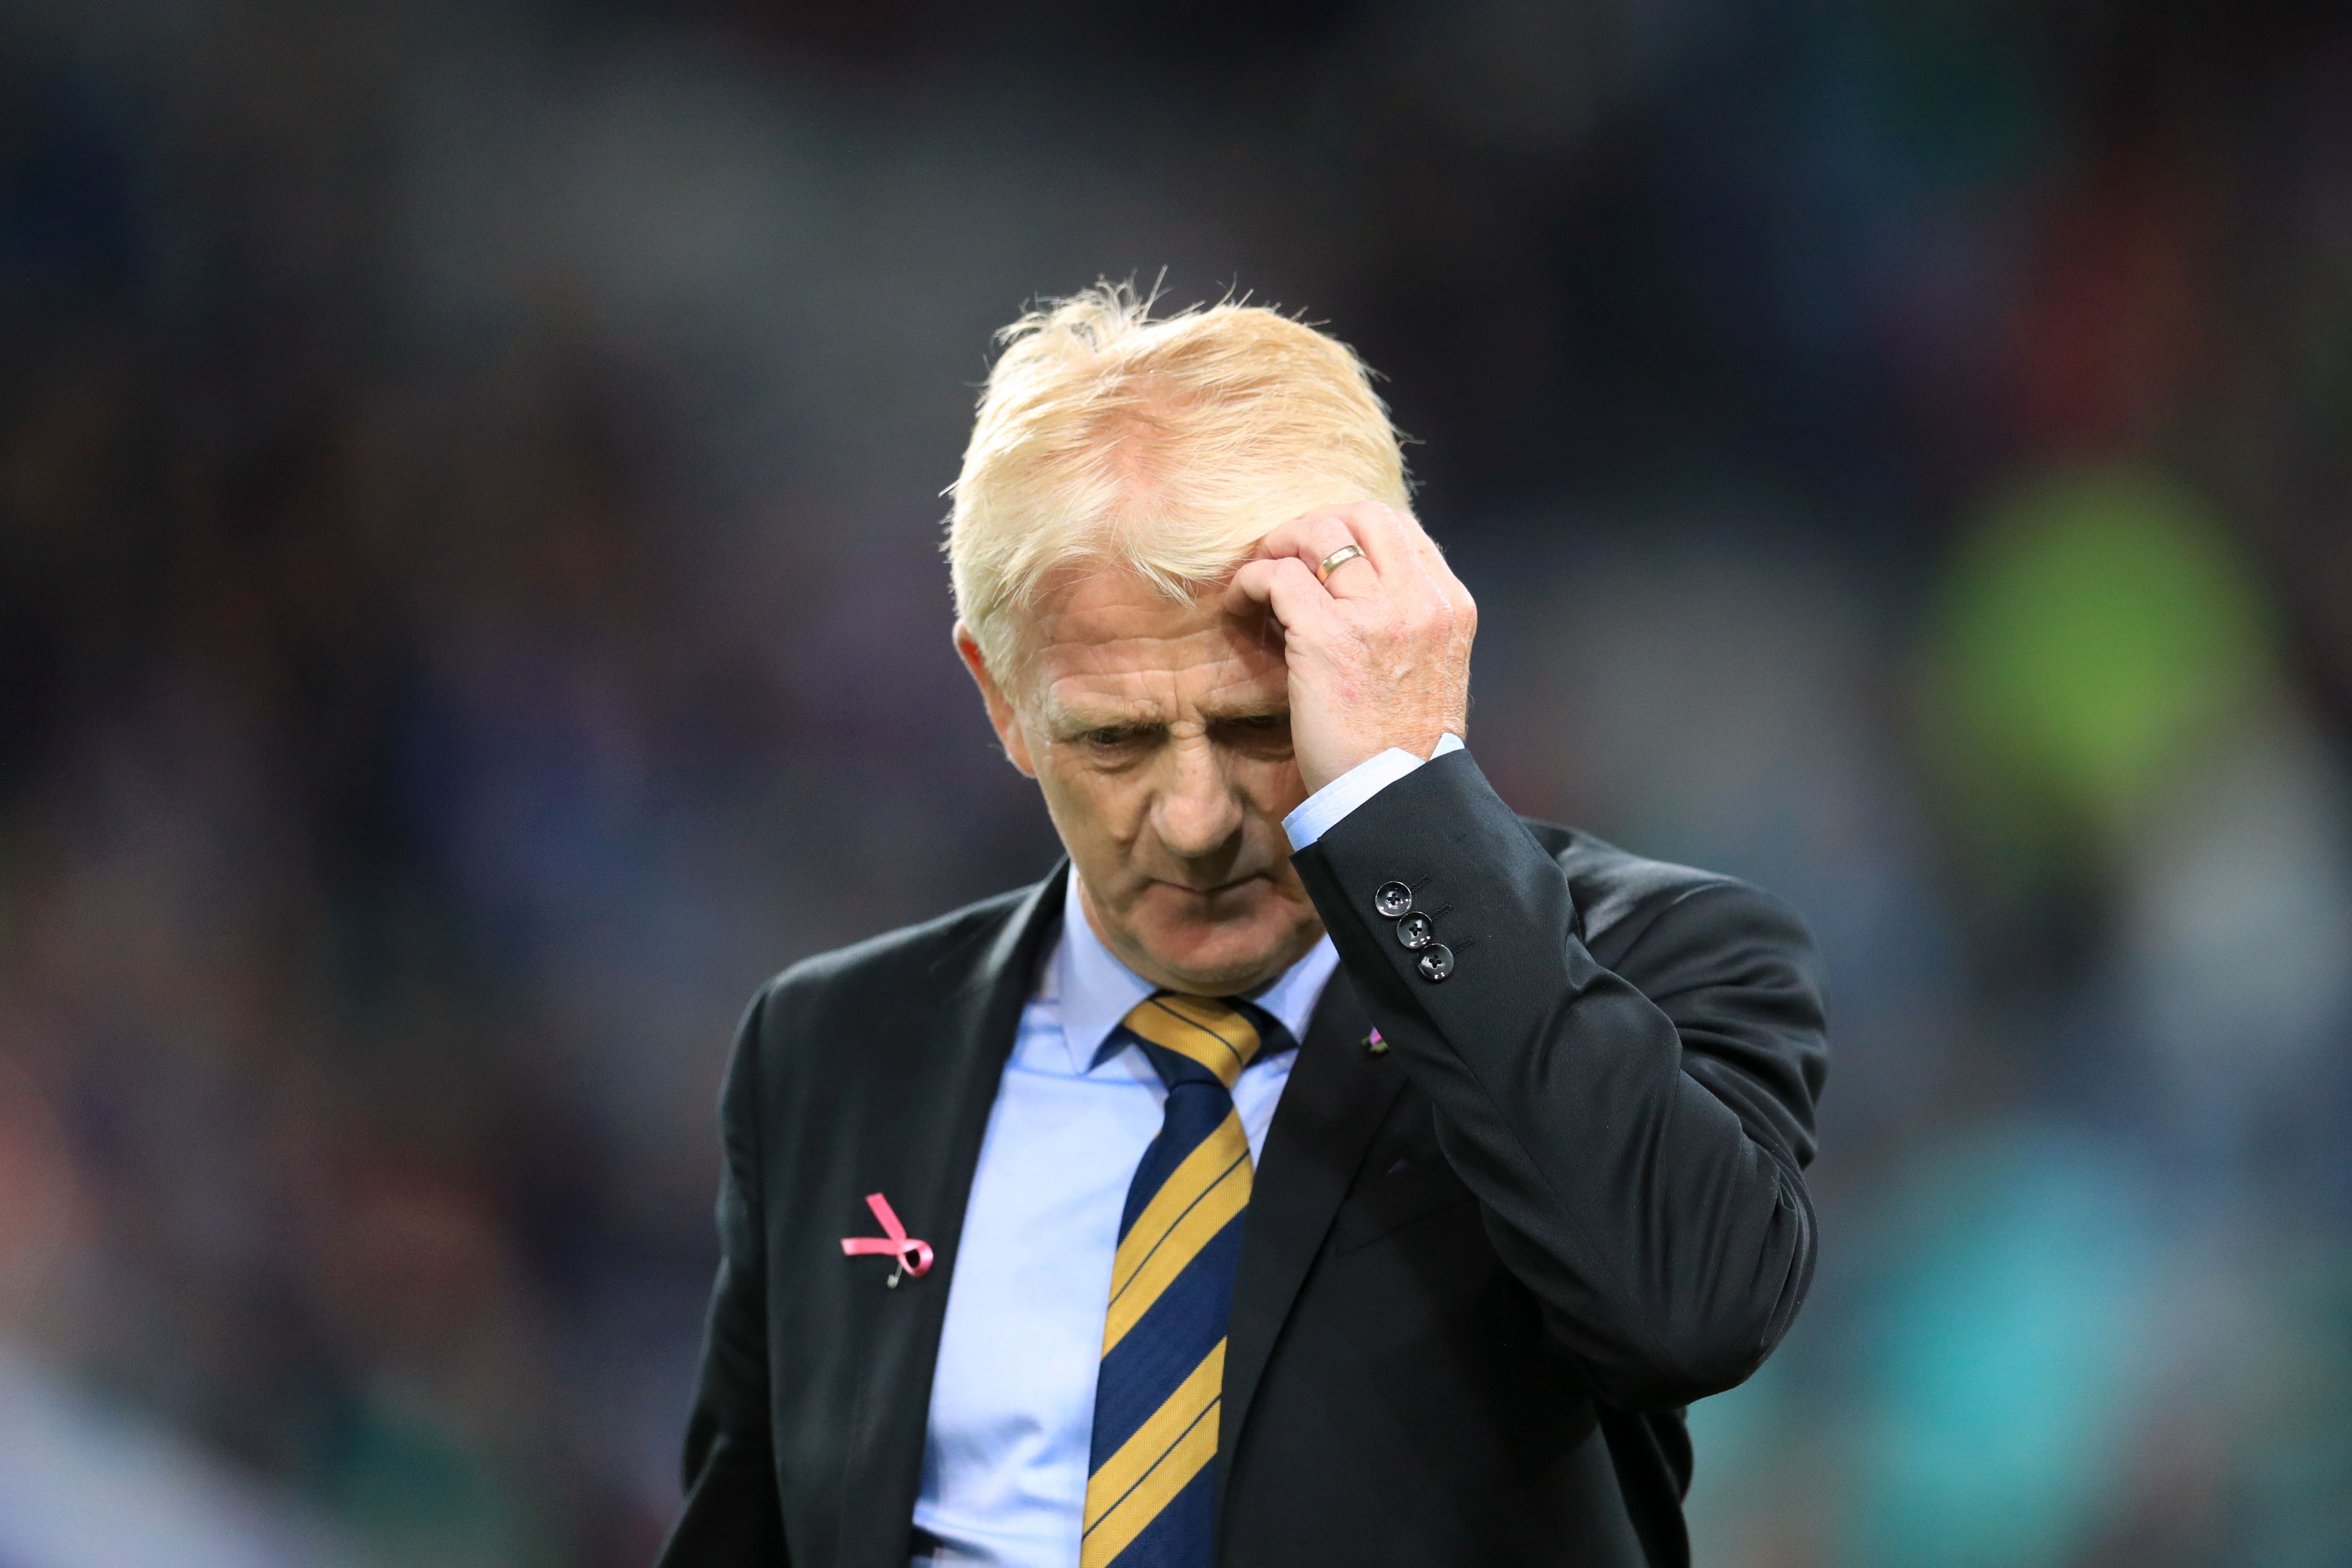 Scotland manager Gordon Strachan appears dejected after the final whistle in Ljubljana (Adam Davy/PA)